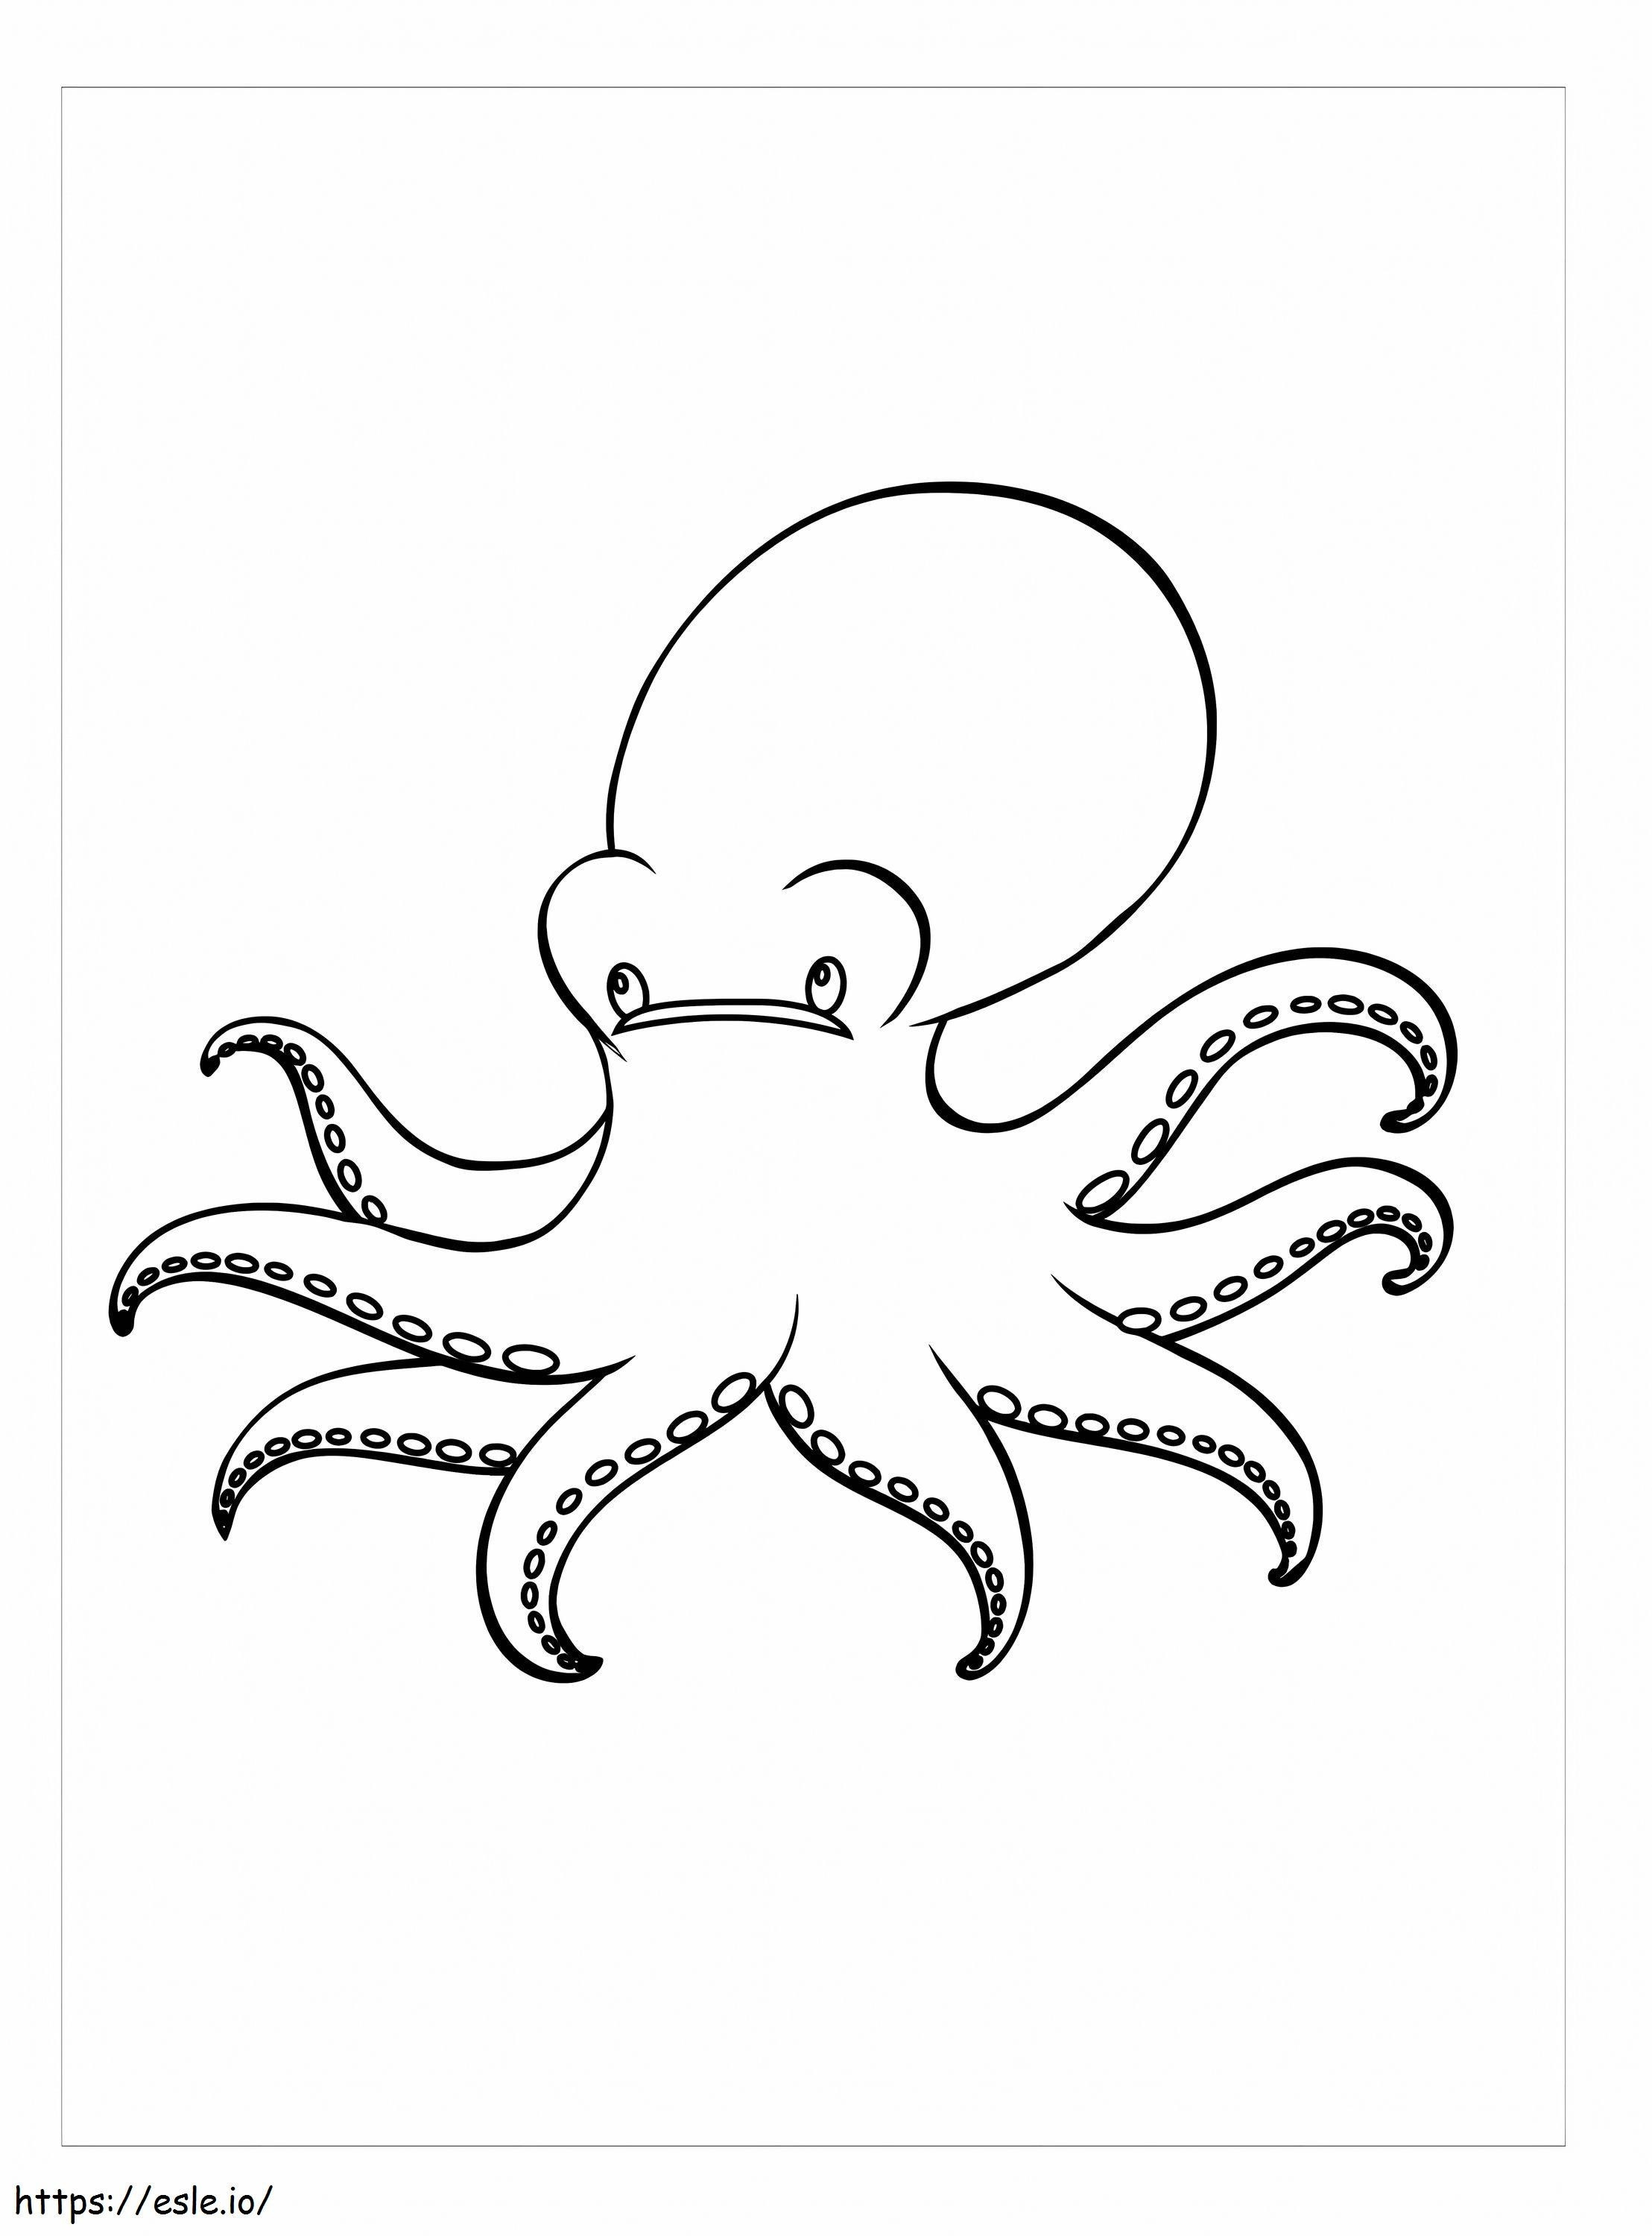 Giant Octopus coloring page